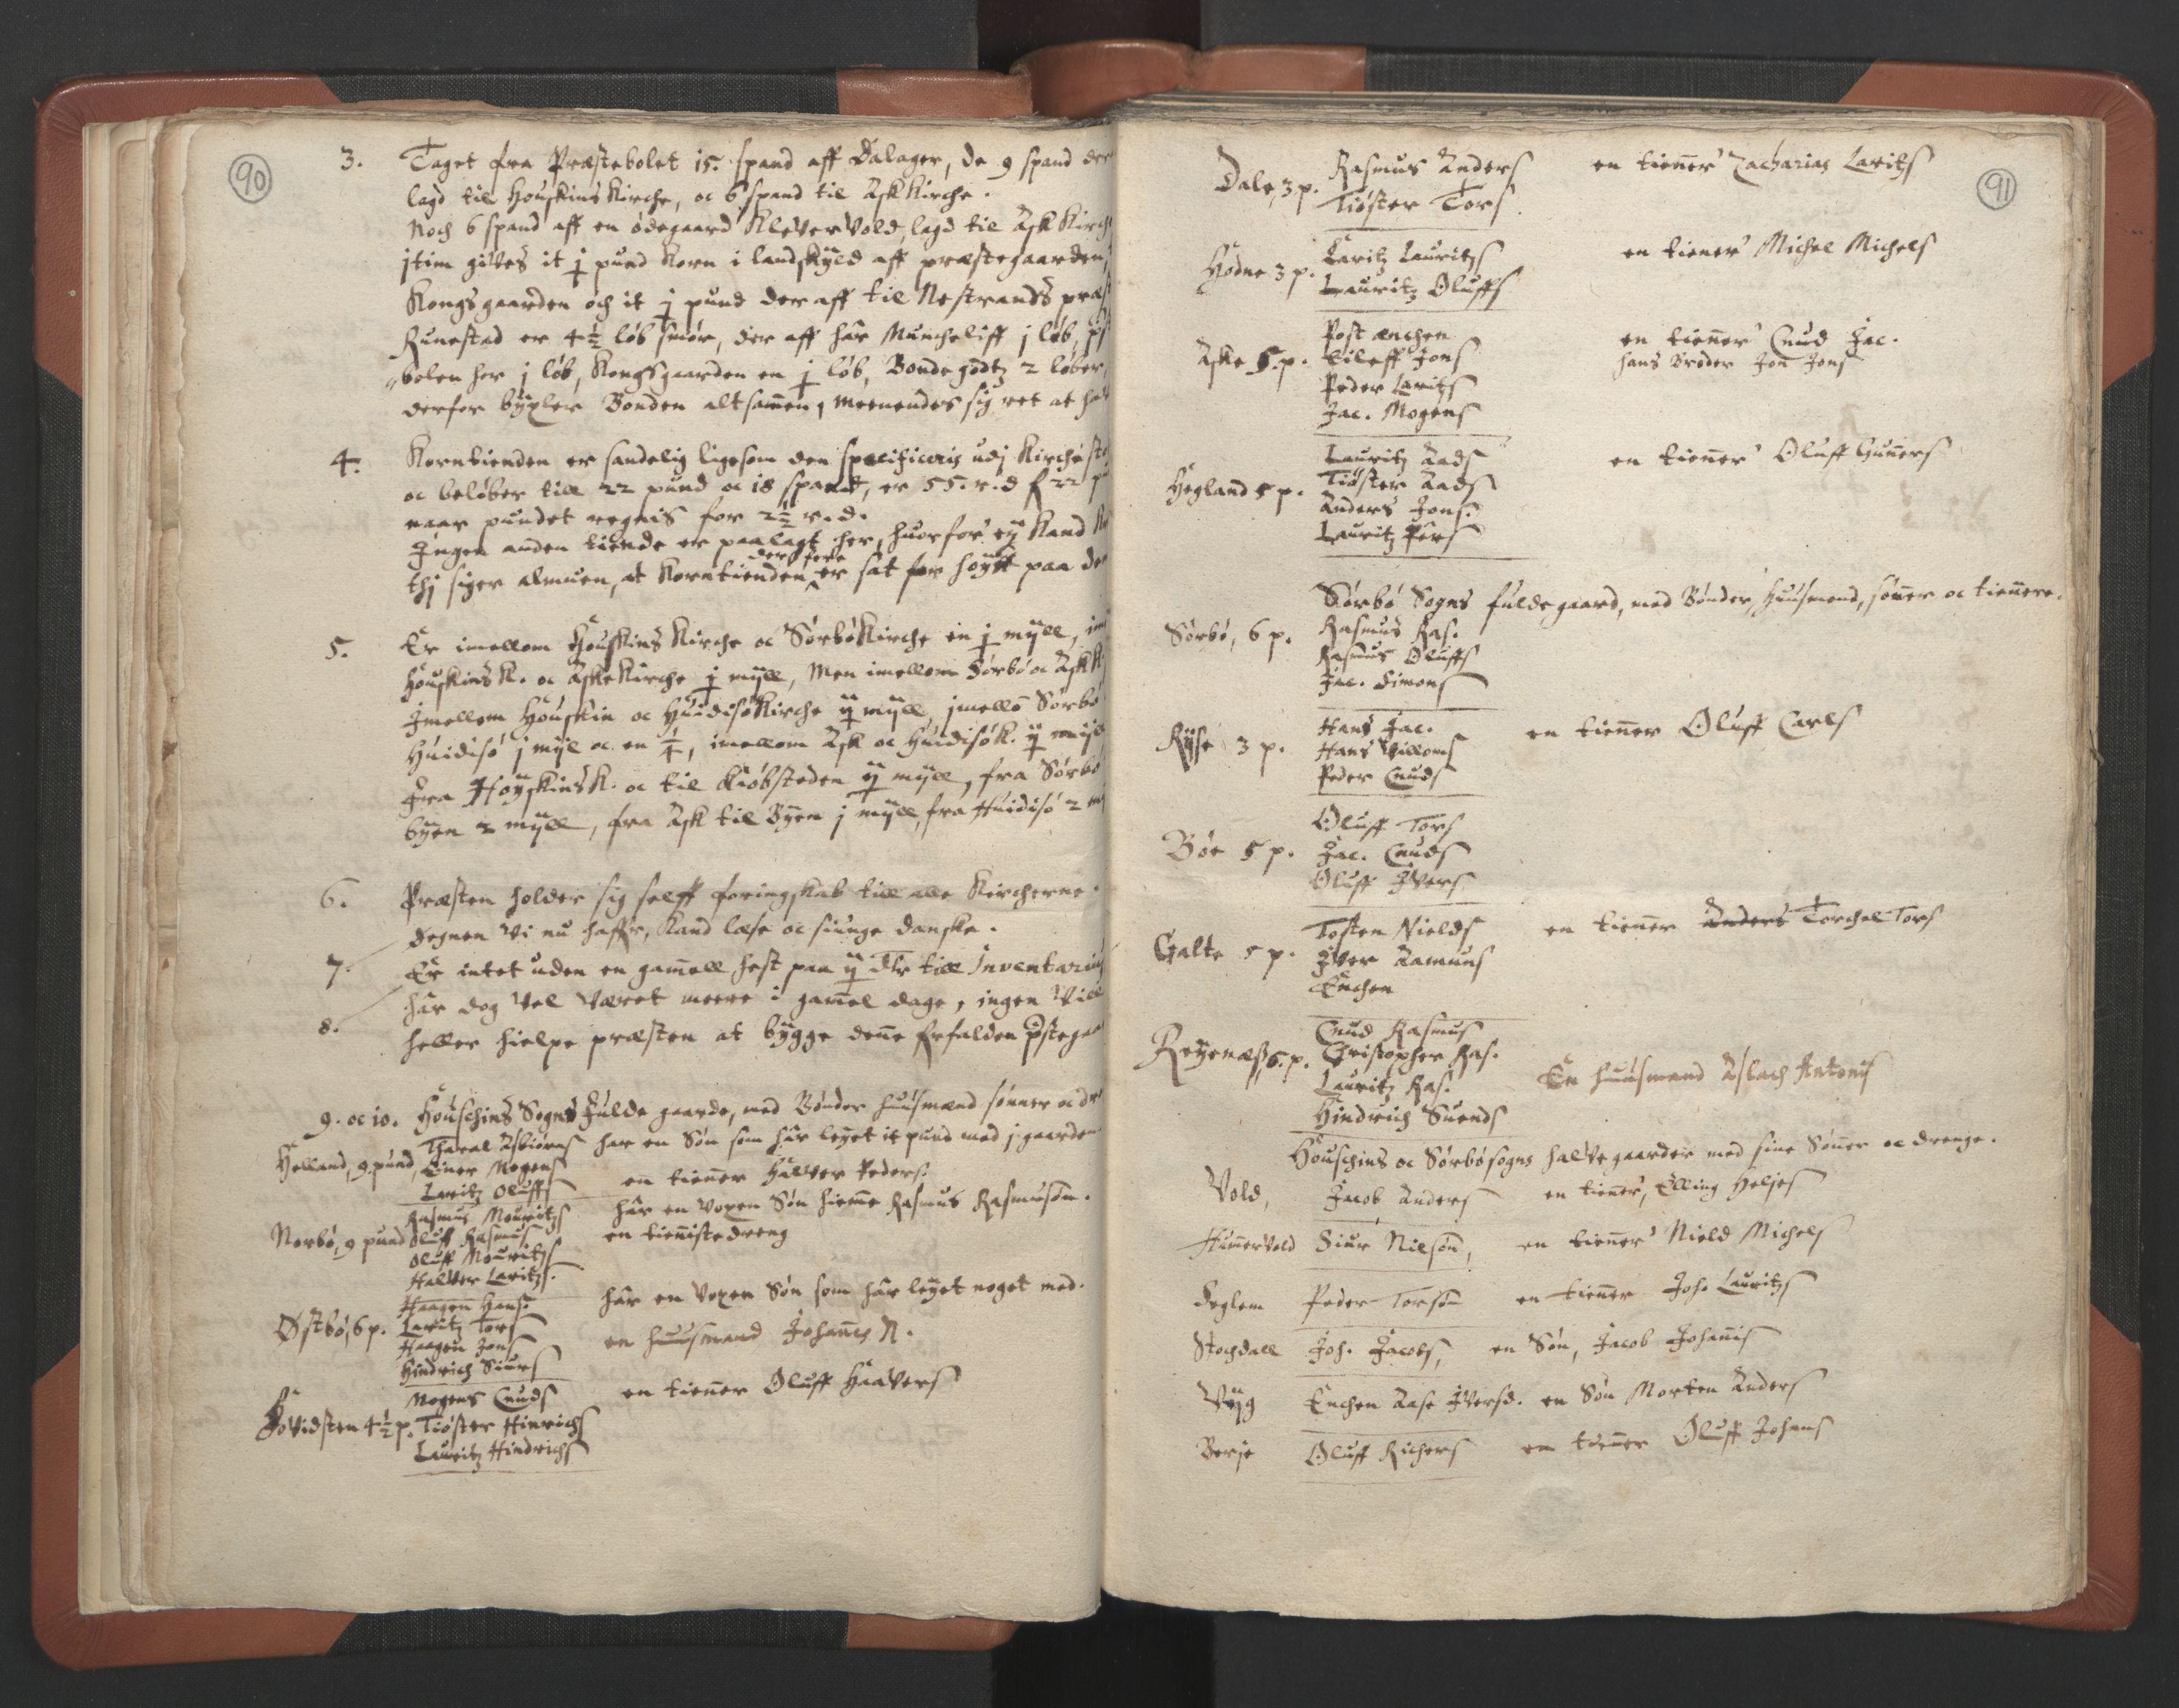 RA, Vicar's Census 1664-1666, no. 18: Stavanger deanery and Karmsund deanery, 1664-1666, p. 90-91